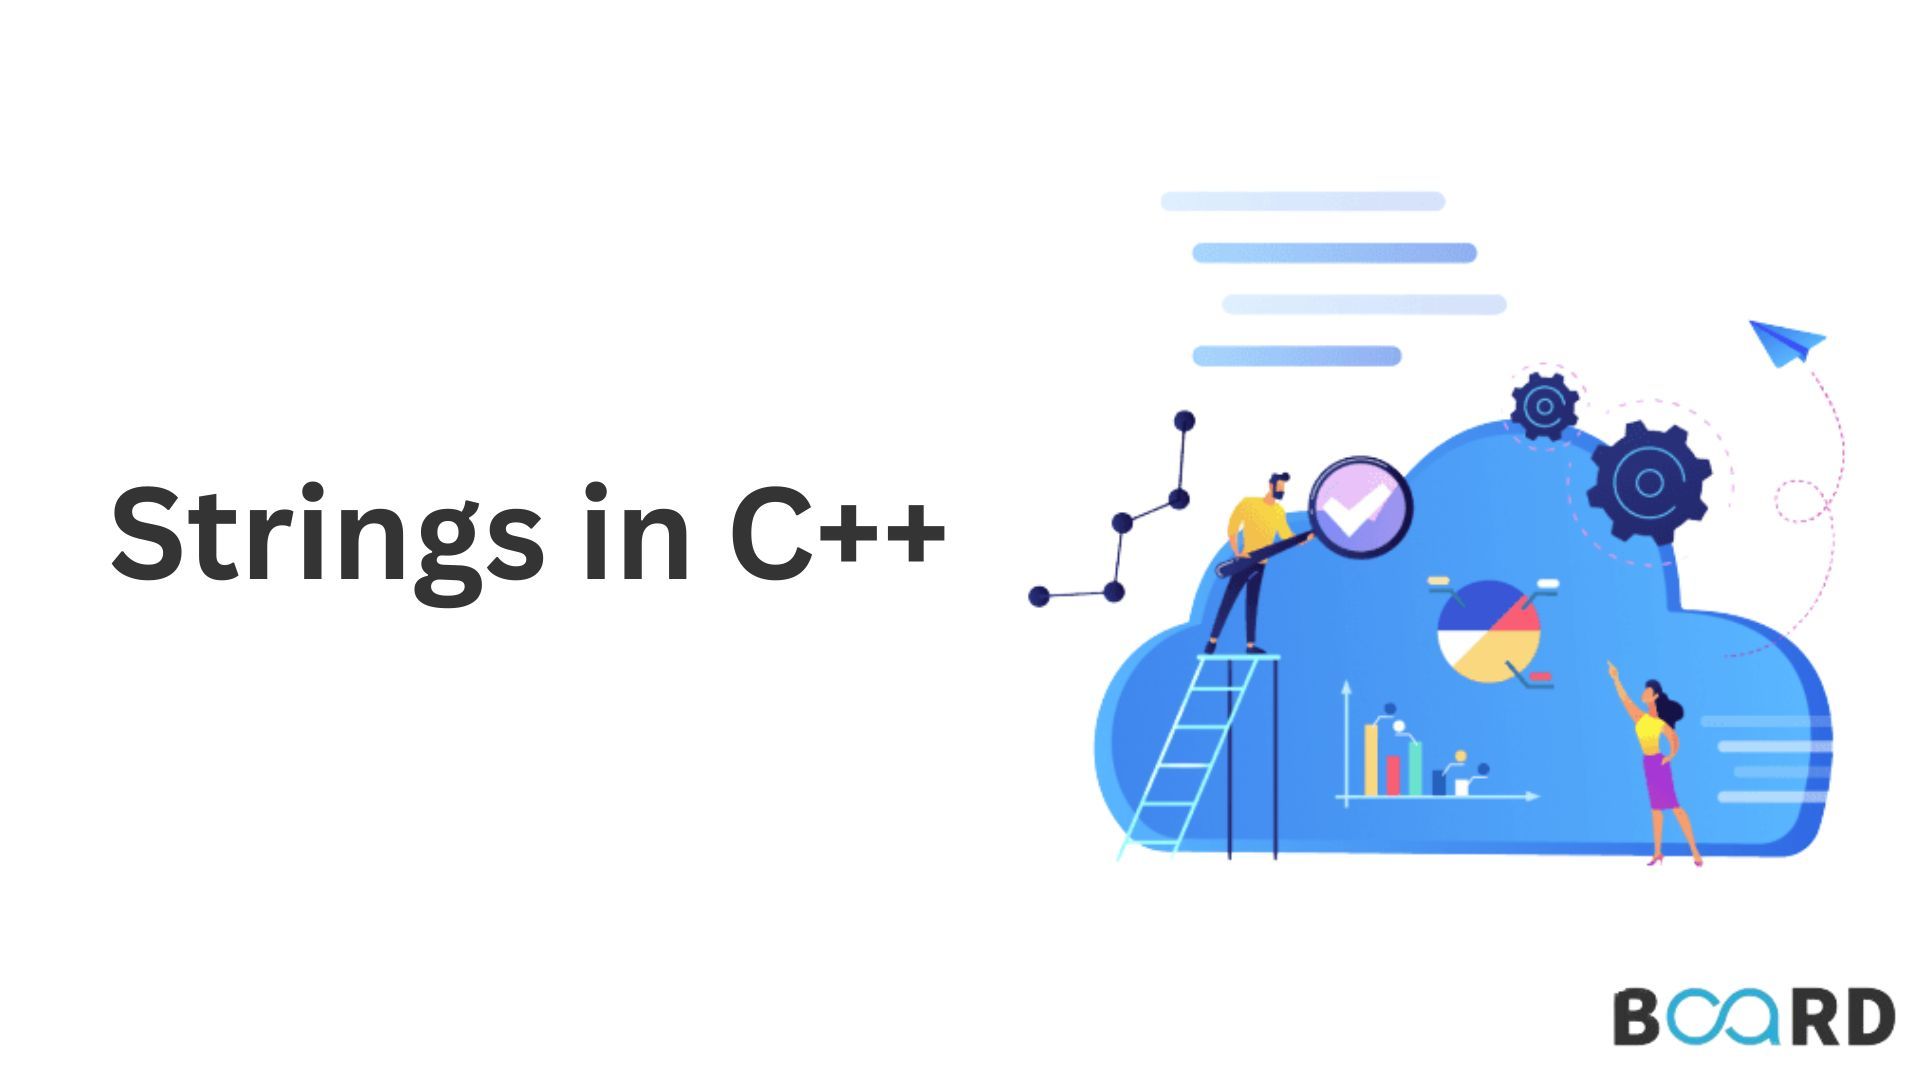 Learn about Strings in C++